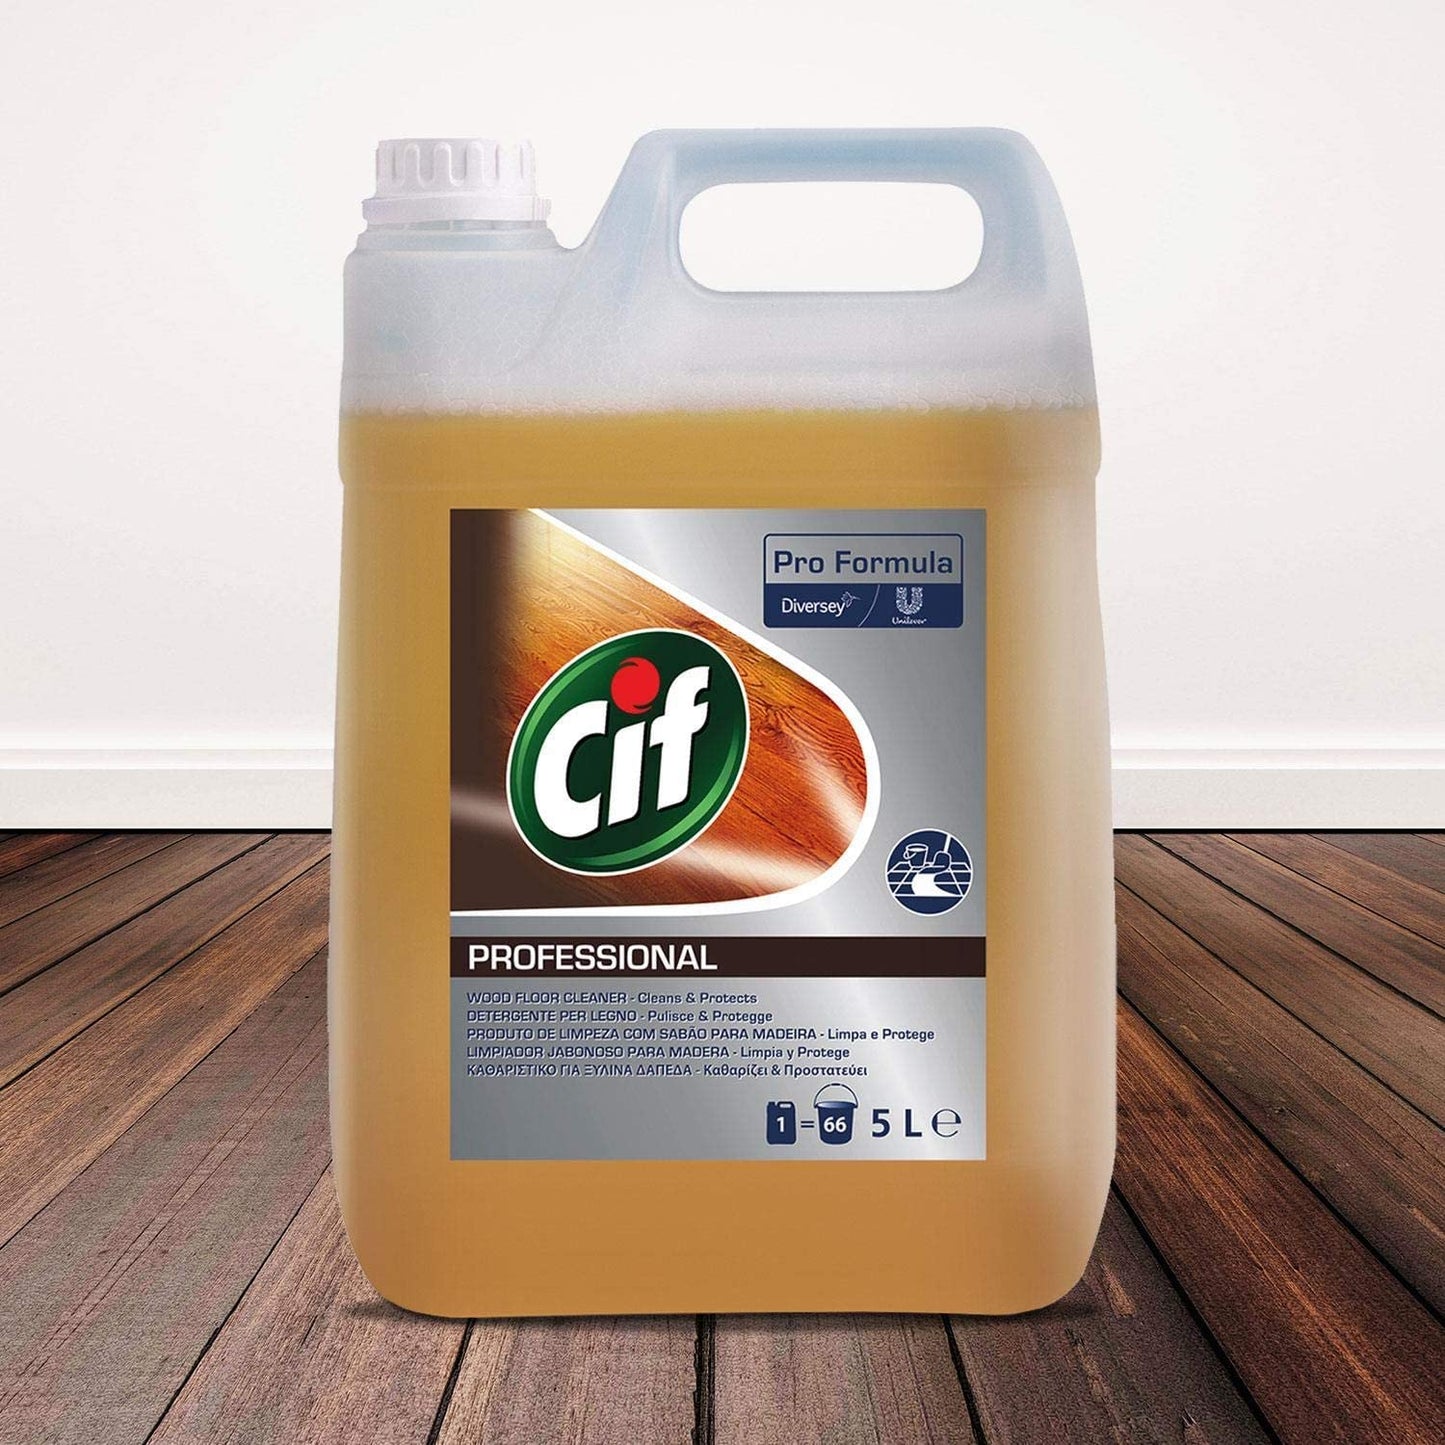 Cif Professional Wood Floor Cleaner Concentrate 5 Litre {Makes Approx 66 Buckets}